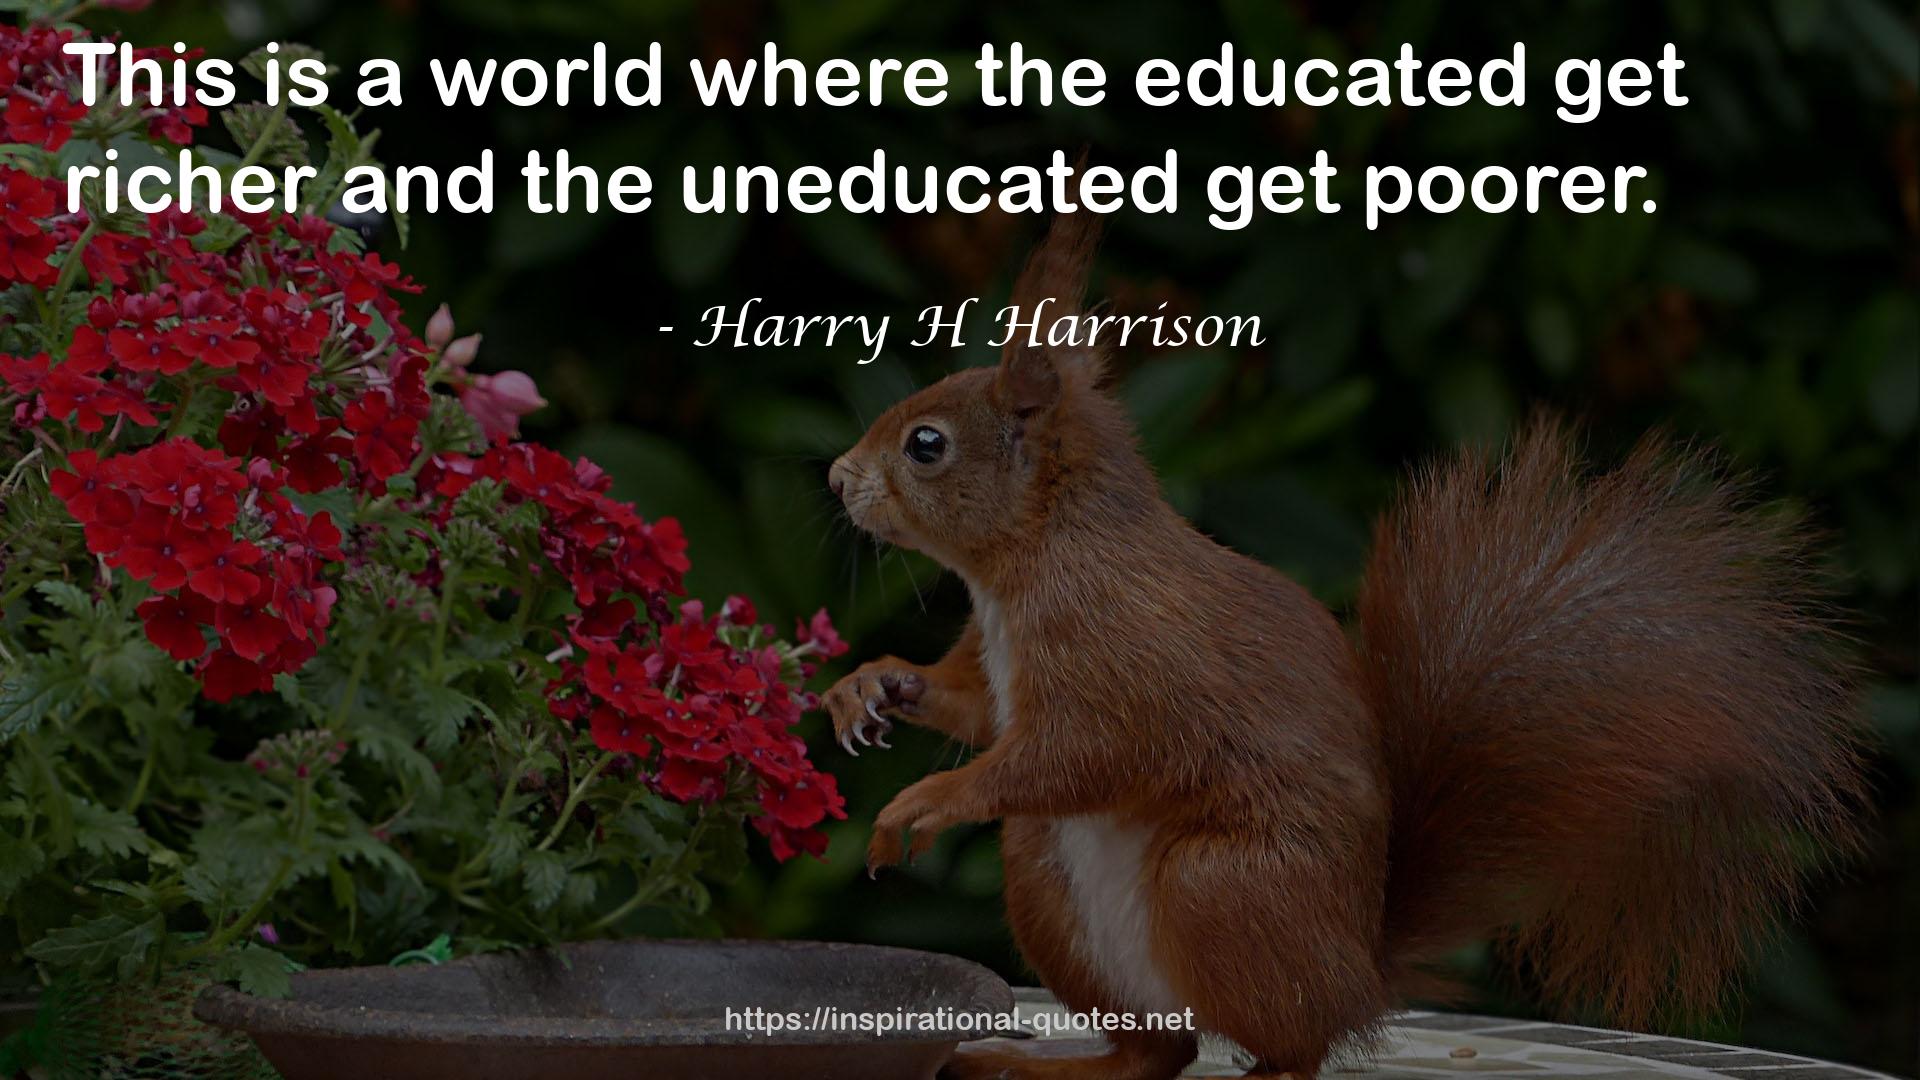 Harry H Harrison QUOTES